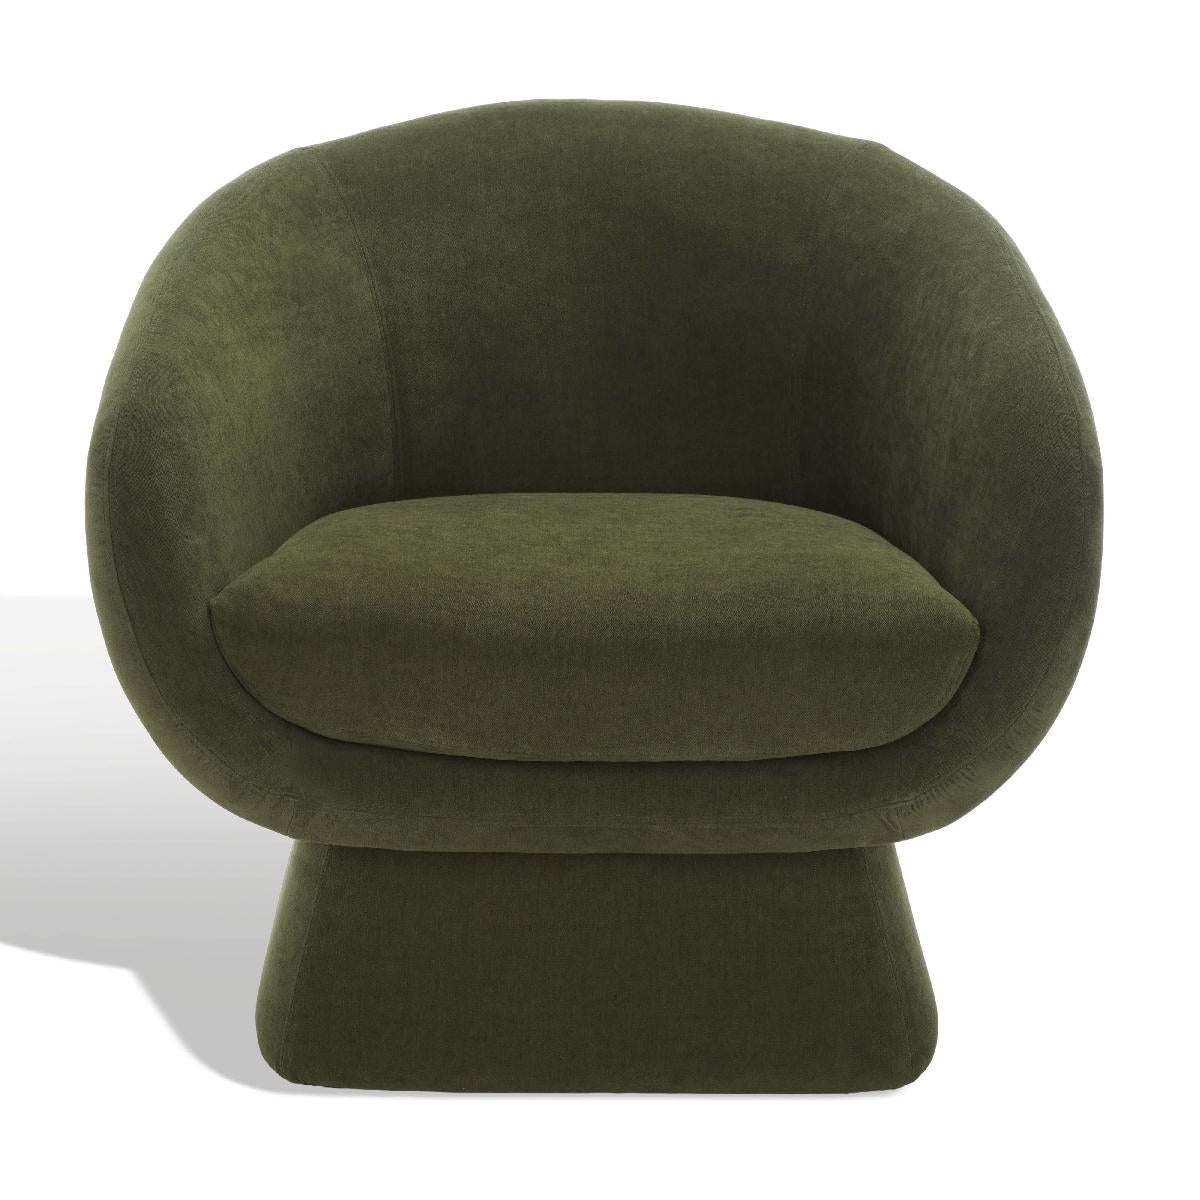 Safavieh Couture Kiana Modern Accent Chair - Olive Green